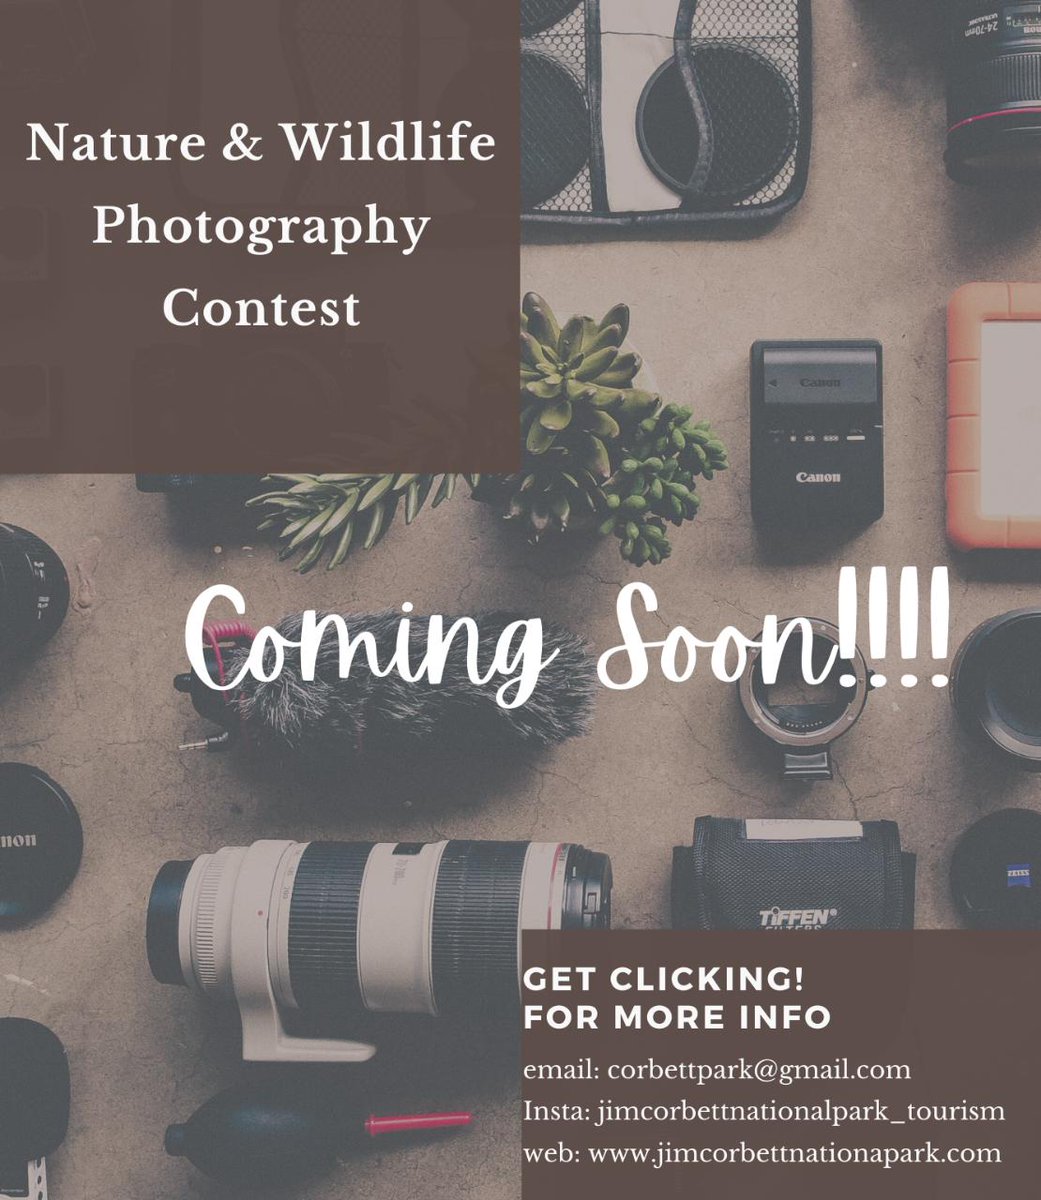 Nature and Wildlife Photography Contest!!
Conducted by - jimcorbettnationalpark.com
.
.
#photo #photography #contest #wildlifephotography #naturephotography #travelphotography #contestalert #photographer #photographersofindia #photographylovers